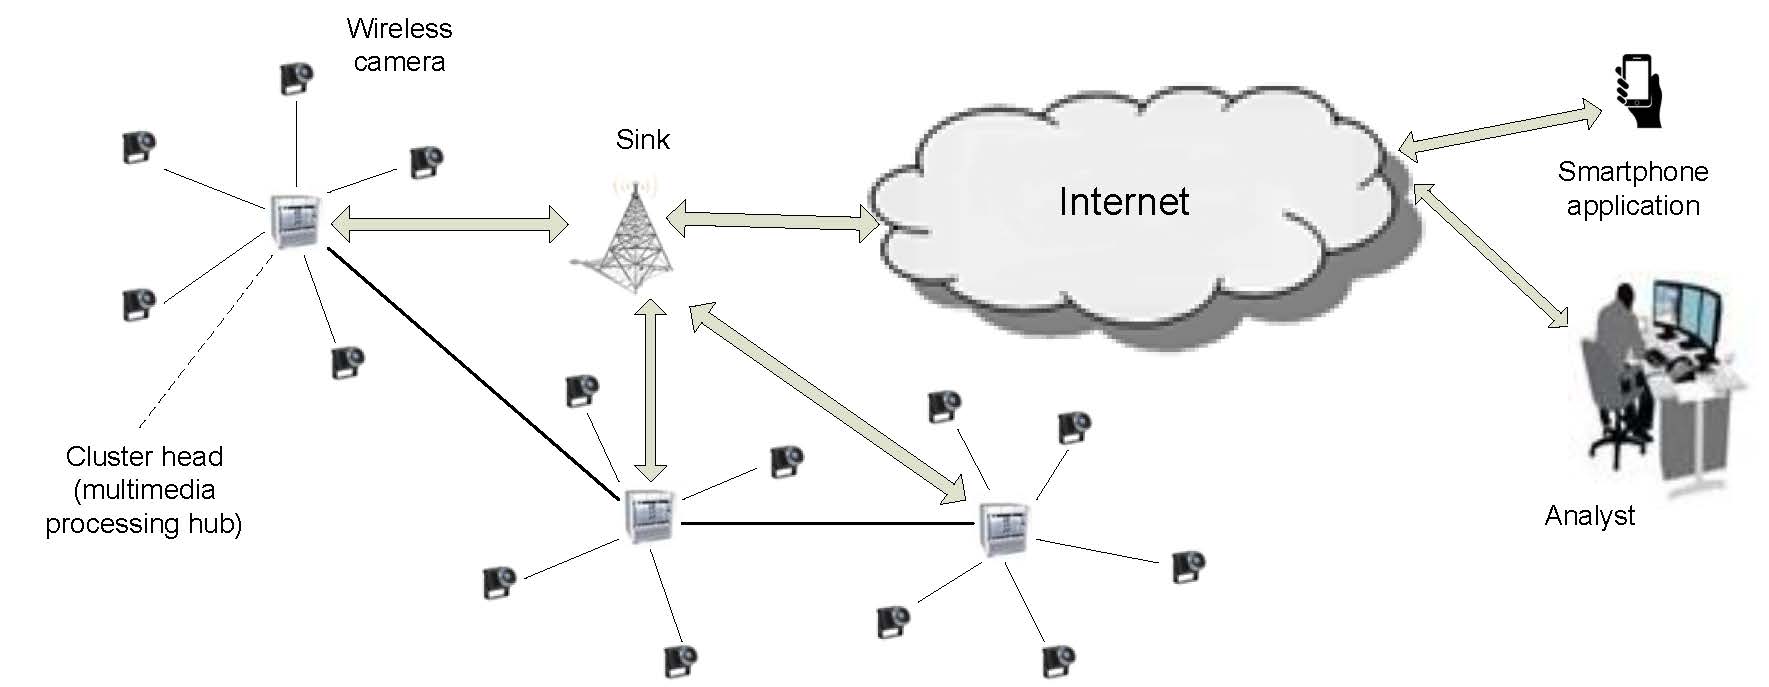 Information-Driven Video Communication for Public Safety Networks